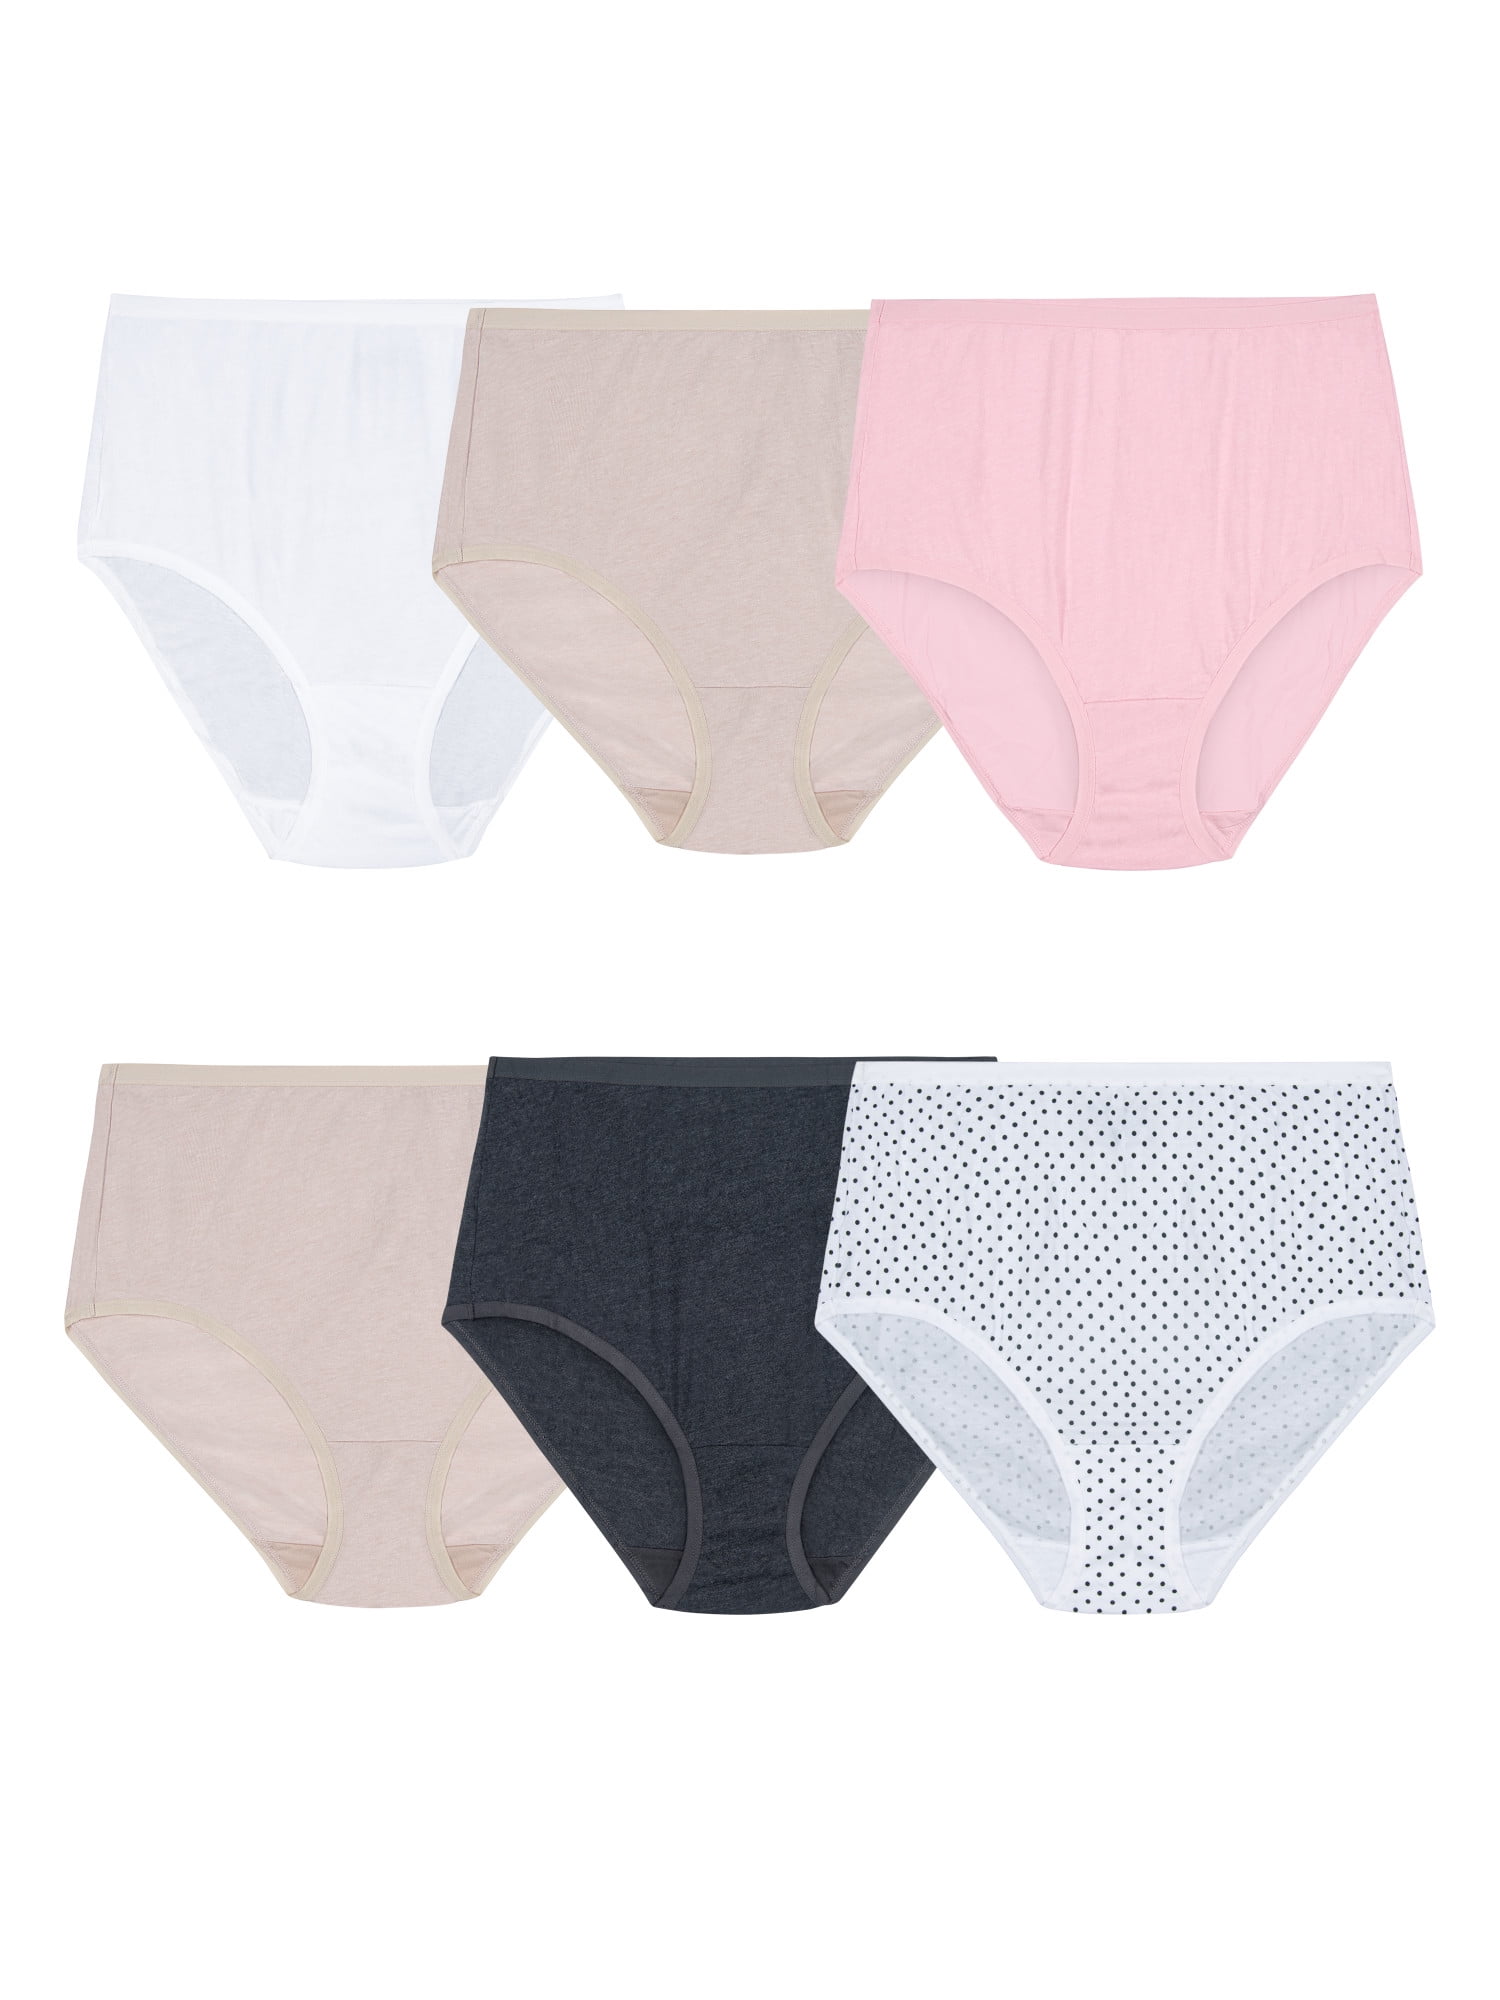 Fruit of the Loom Women's Premium Ultra Soft Brief Panty, 6 Pack